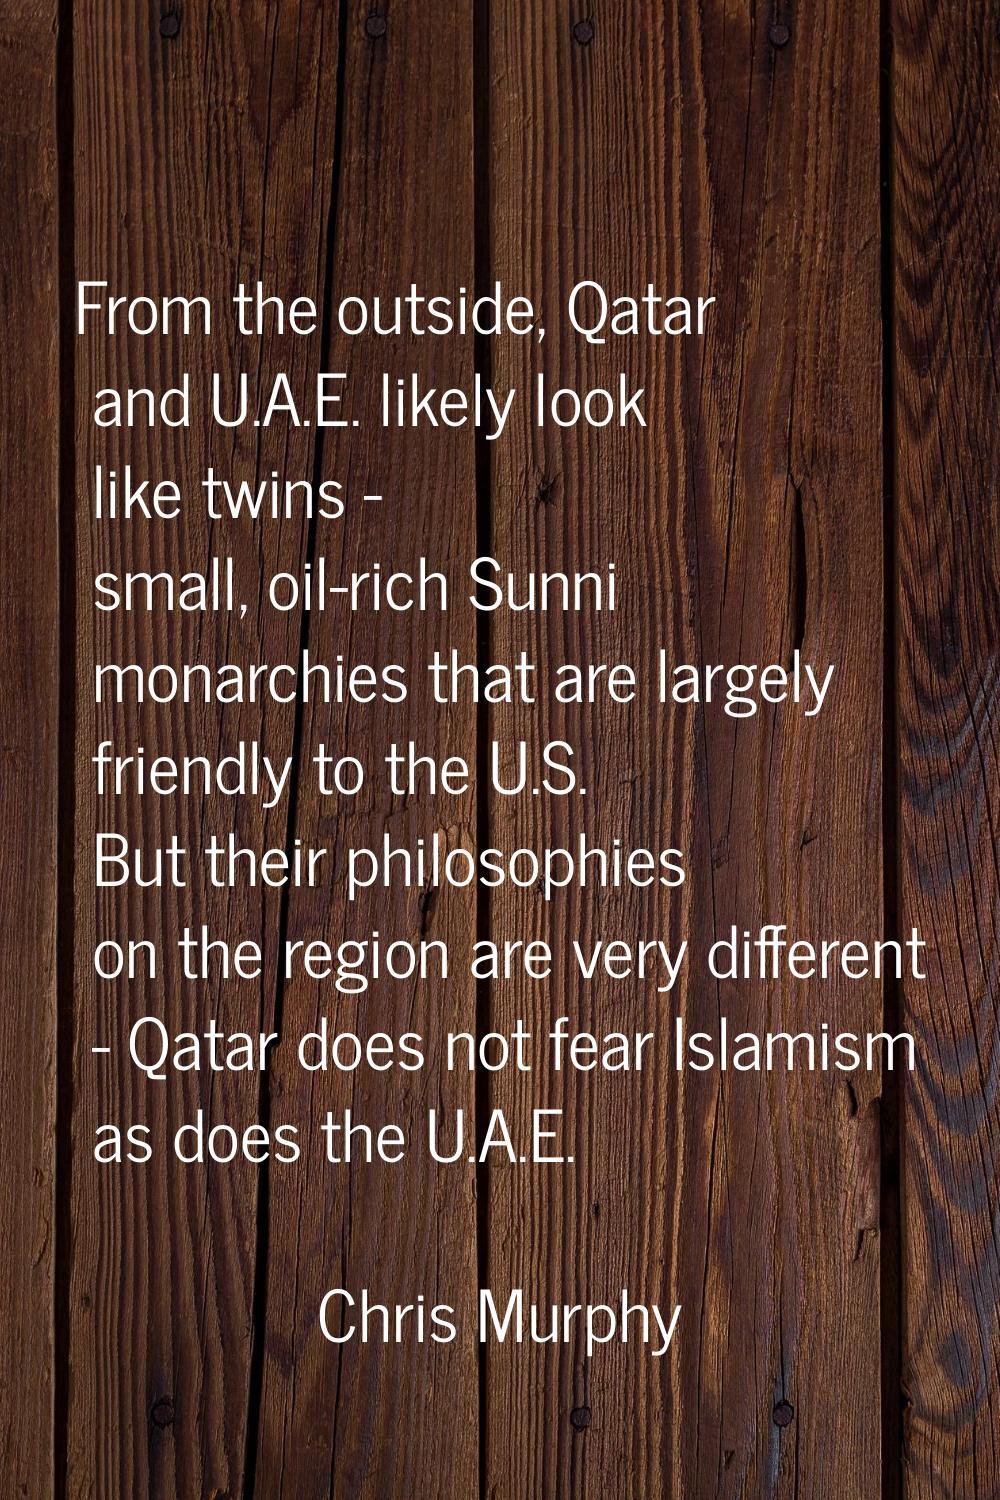 From the outside, Qatar and U.A.E. likely look like twins - small, oil-rich Sunni monarchies that a